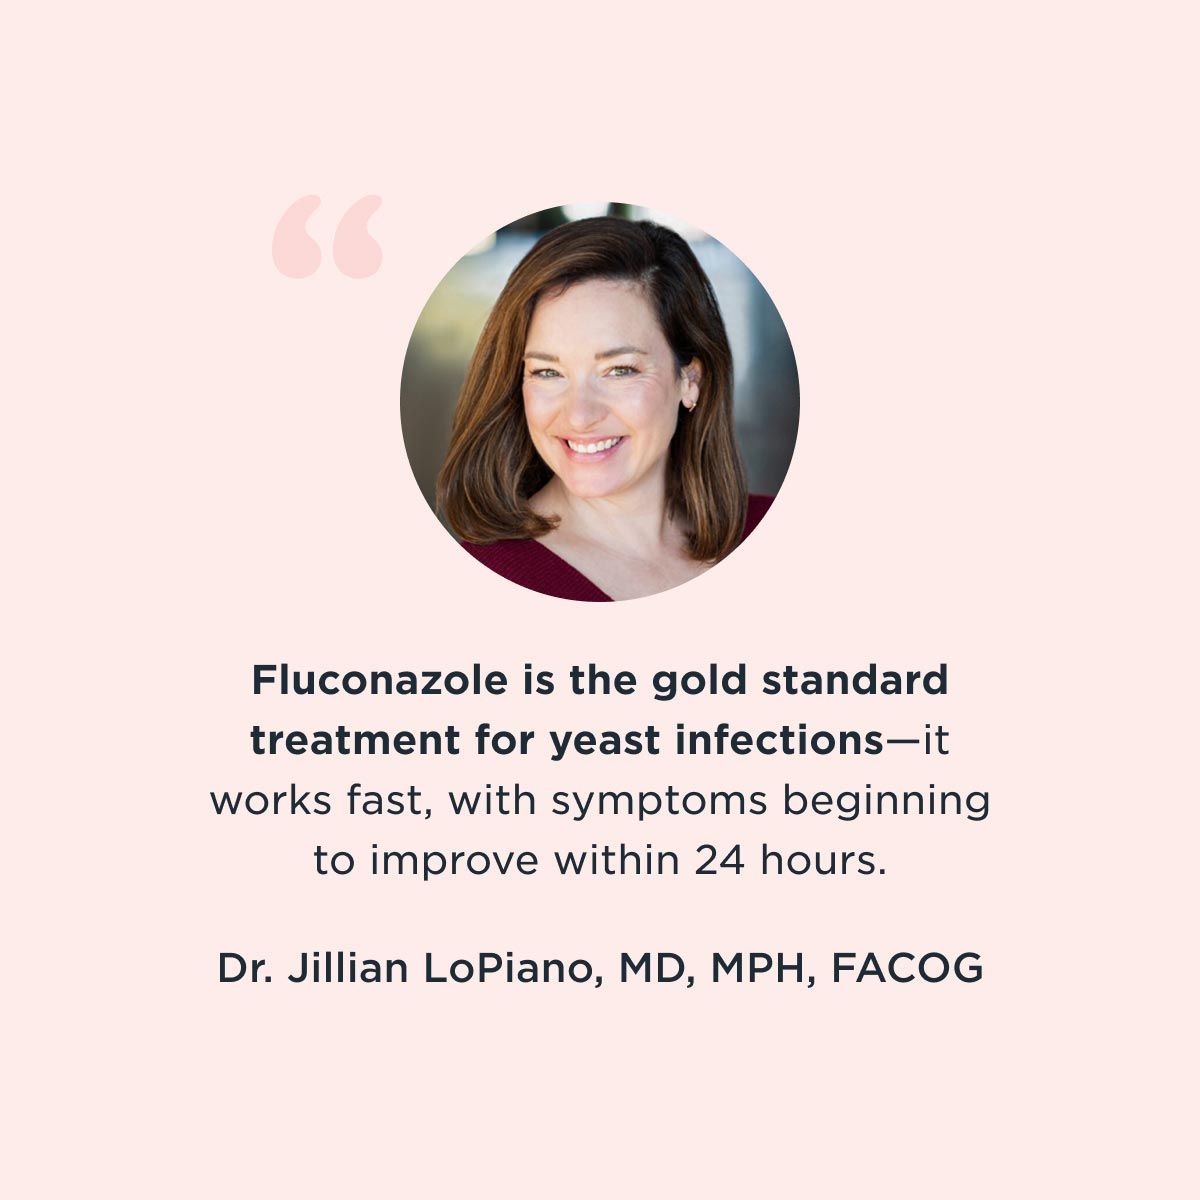 A medial provider quote about yeast infection treatment from Dr. Jillian Lopiano, MD